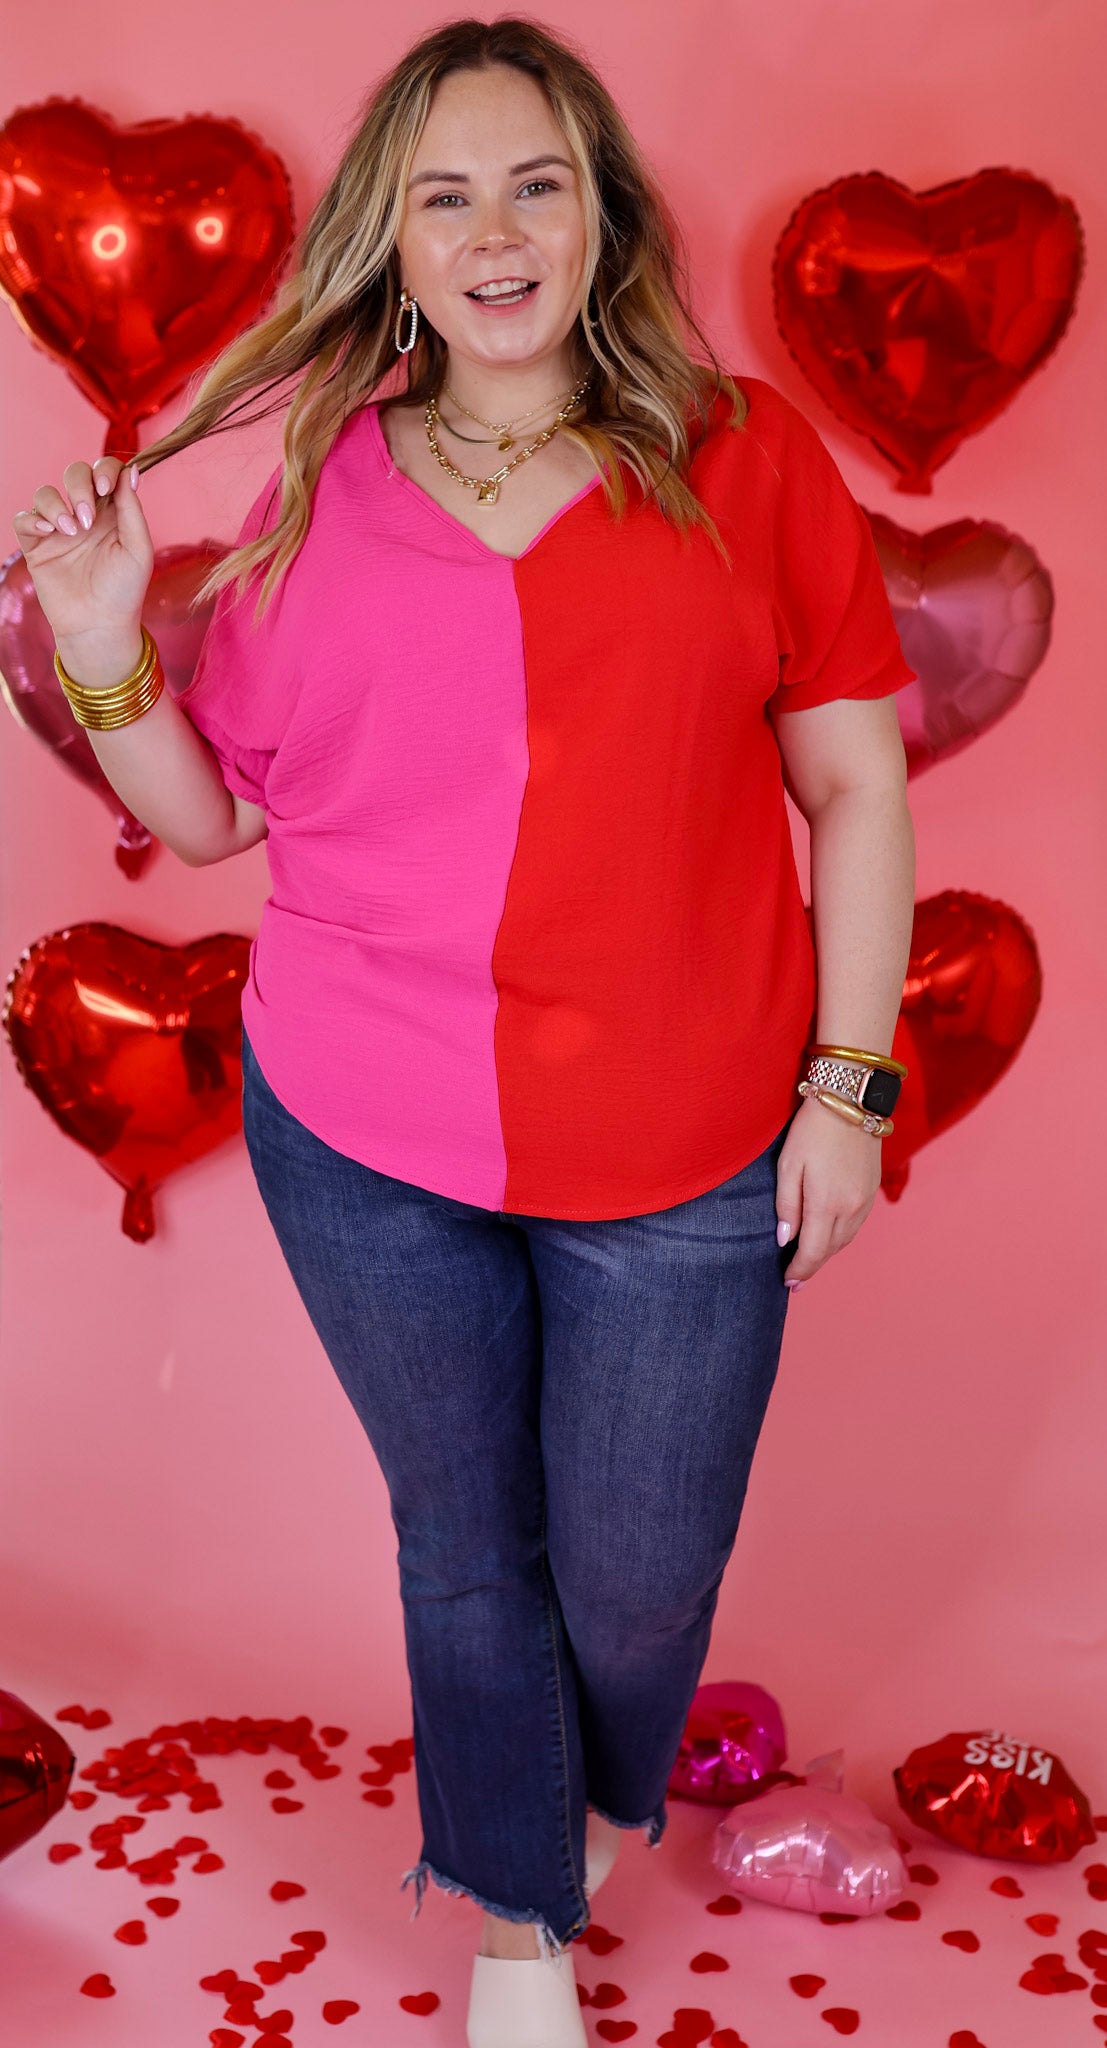 Lovely Dear V Neck Short Sleeve Color Block Top in Fuchsia and Red - Giddy Up Glamour Boutique